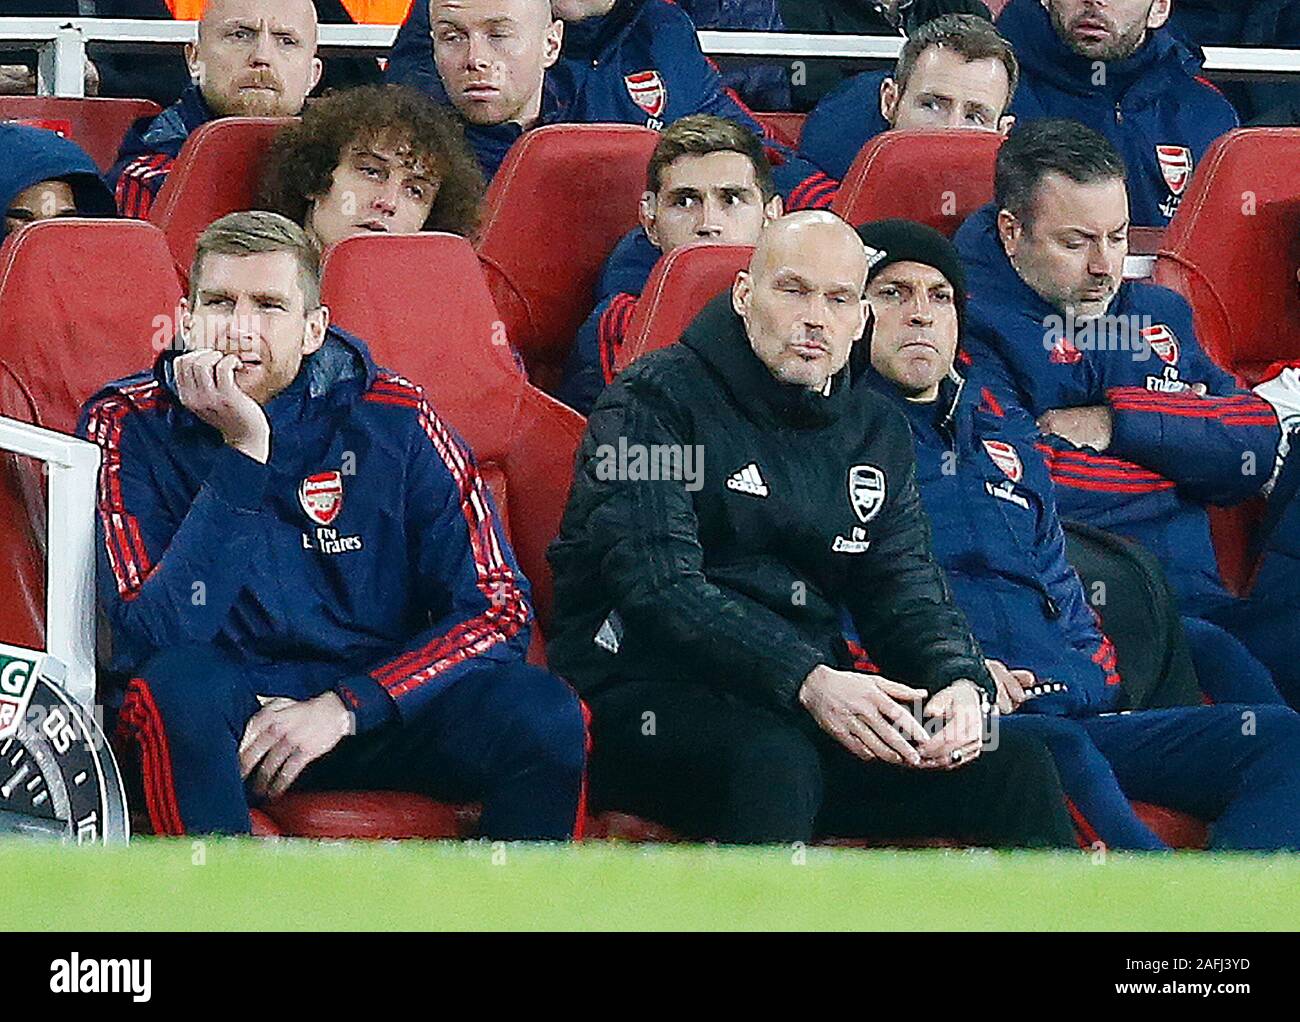 LONDON, United Kingdom, DECEMBER 15.L-R Interim First-team Assistant Head Coach Per Mertesacker, Interim Head Coach Freddie Ljungberg and Steve Bould (Black Hat) during English Premier League between Arsenal and Manchester City at Emirates stadium, London, England on 15 December 2019. (Photo by AFS/Espa-Images) Stock Photo